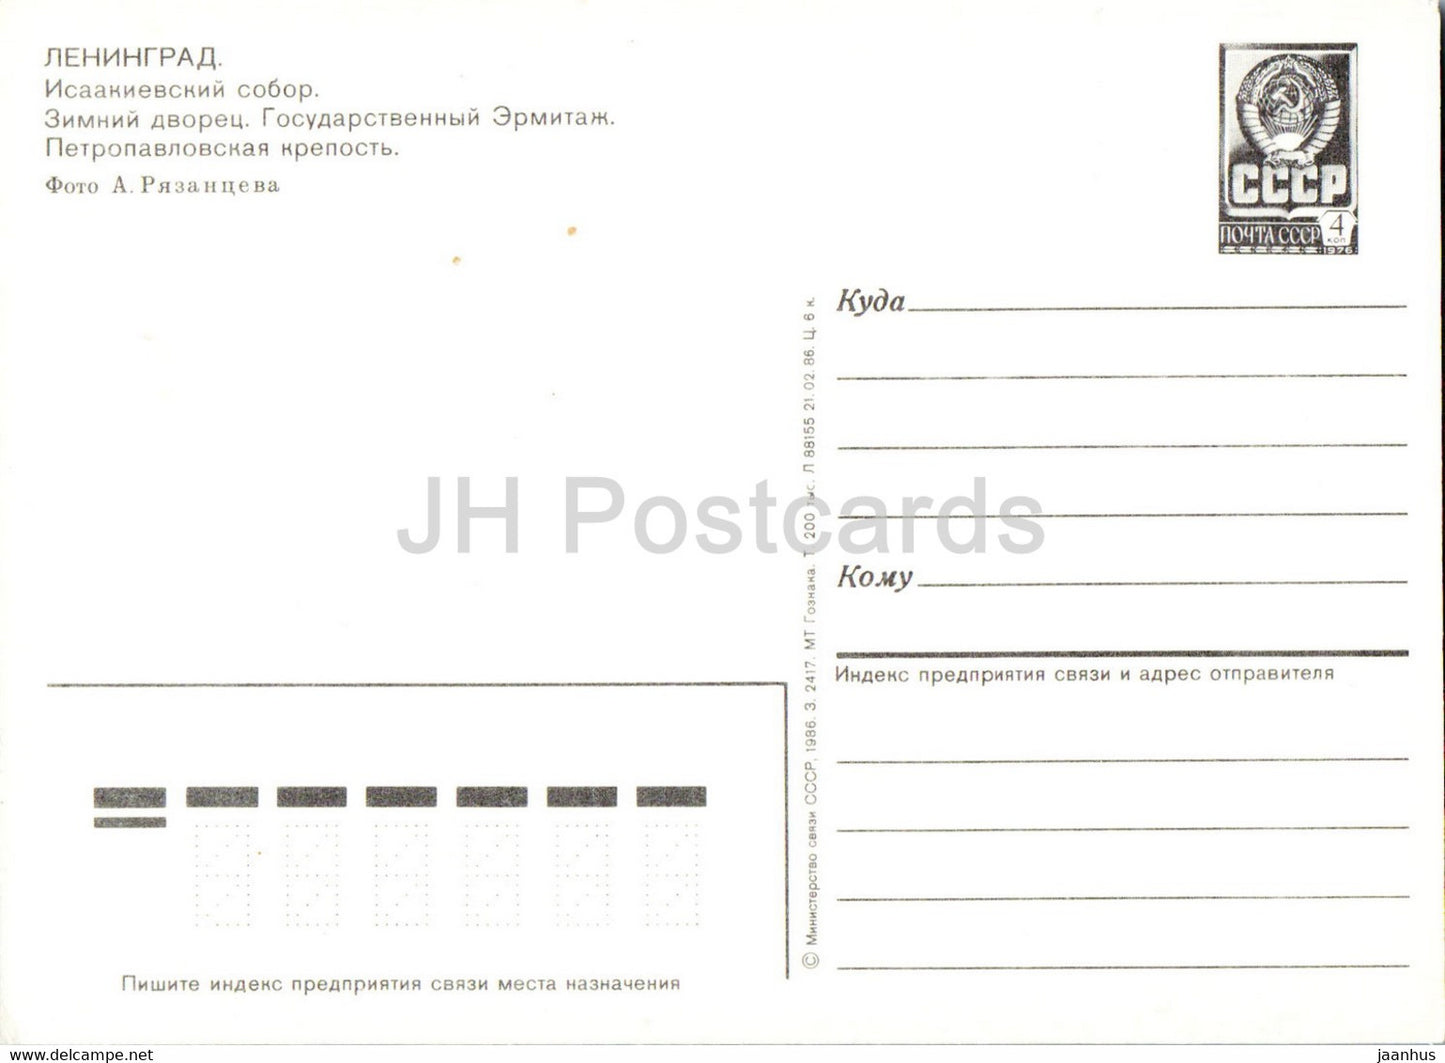 Leningrad - St Petersburg - St Isaac's Cathedral - Winter Palace - postal stationery - 1986 - Russia USSR - unused